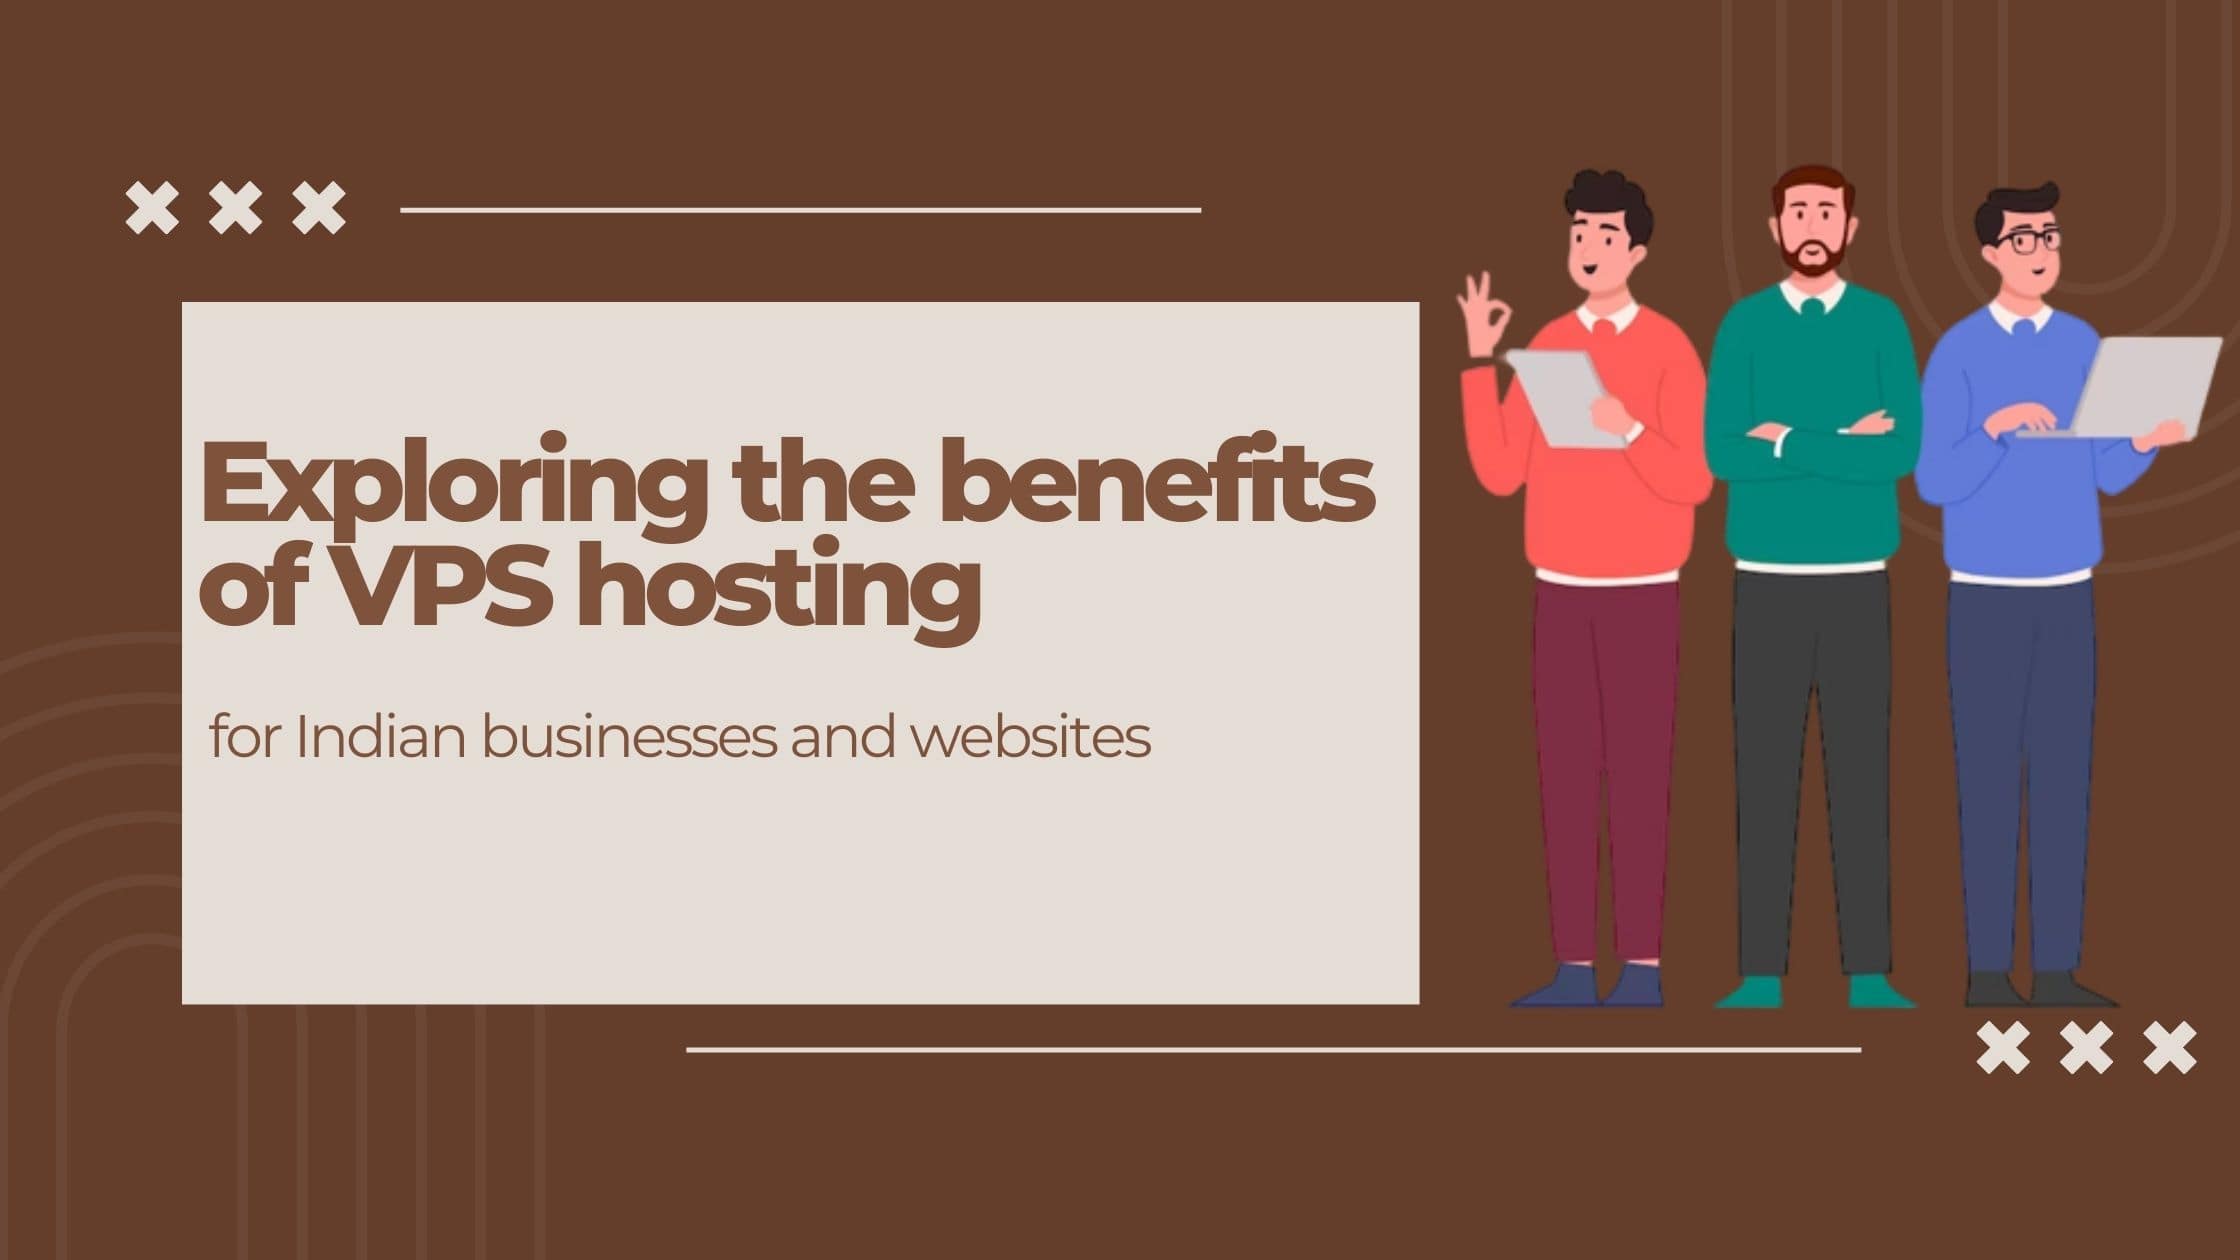 Exploring the benefits of VPS hosting for Indian businesses and websites